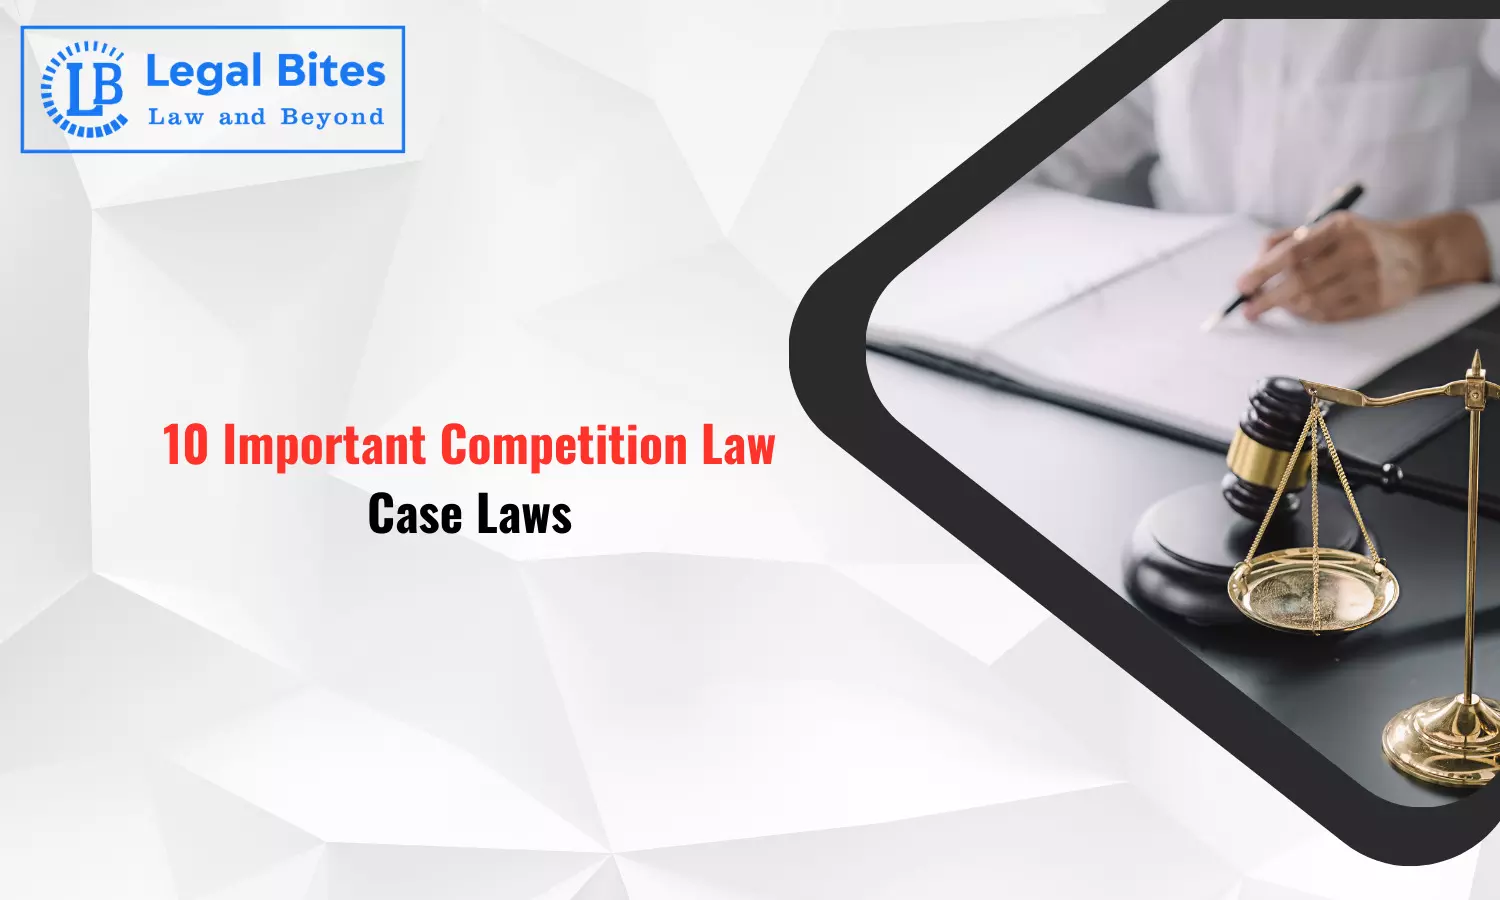 10 Important Competition Law Cases